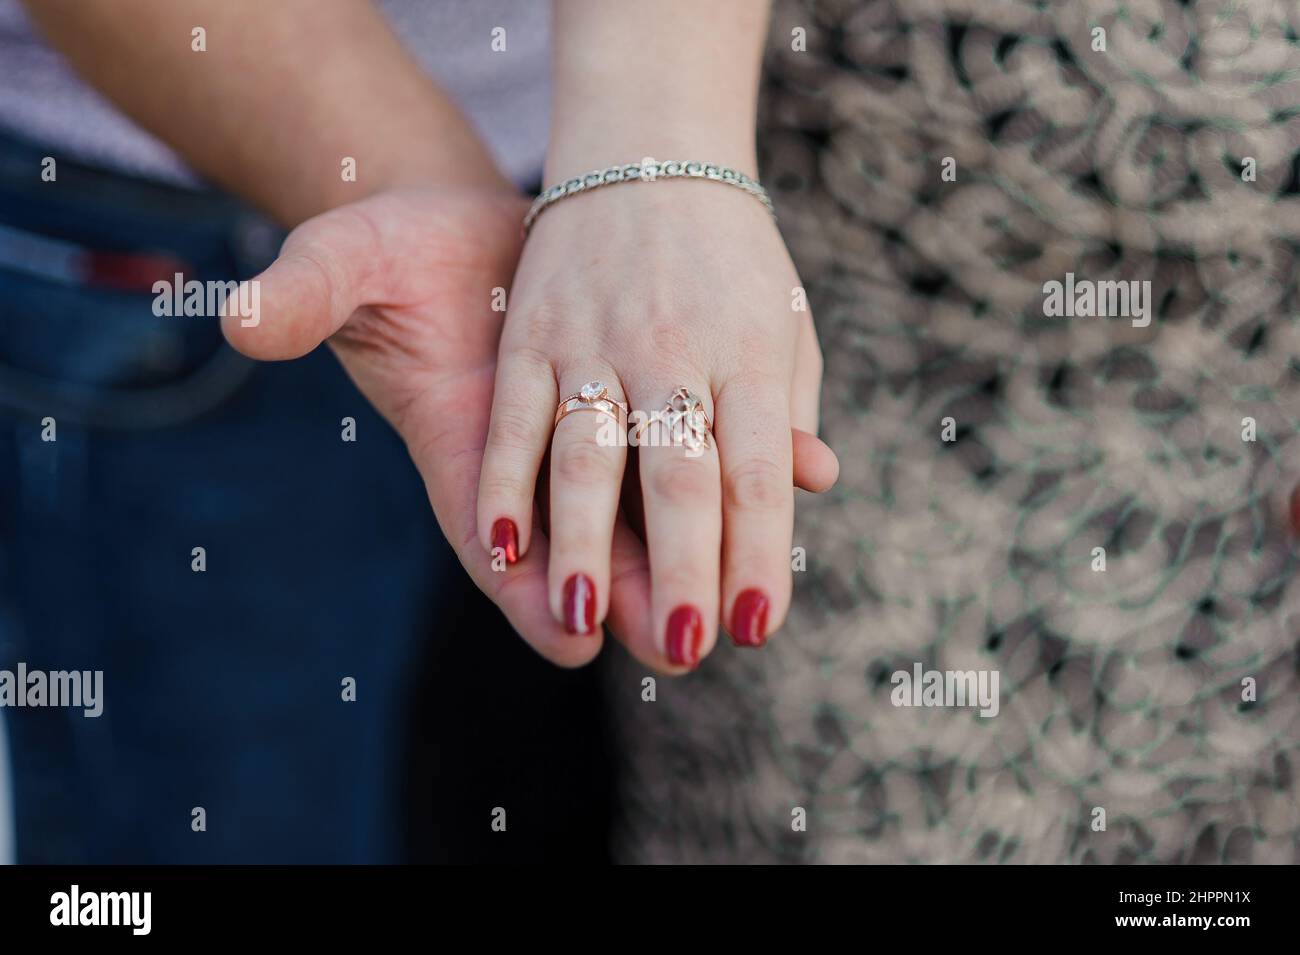 An offer of marriage. Golden ring on a woman's hand Stock Photo